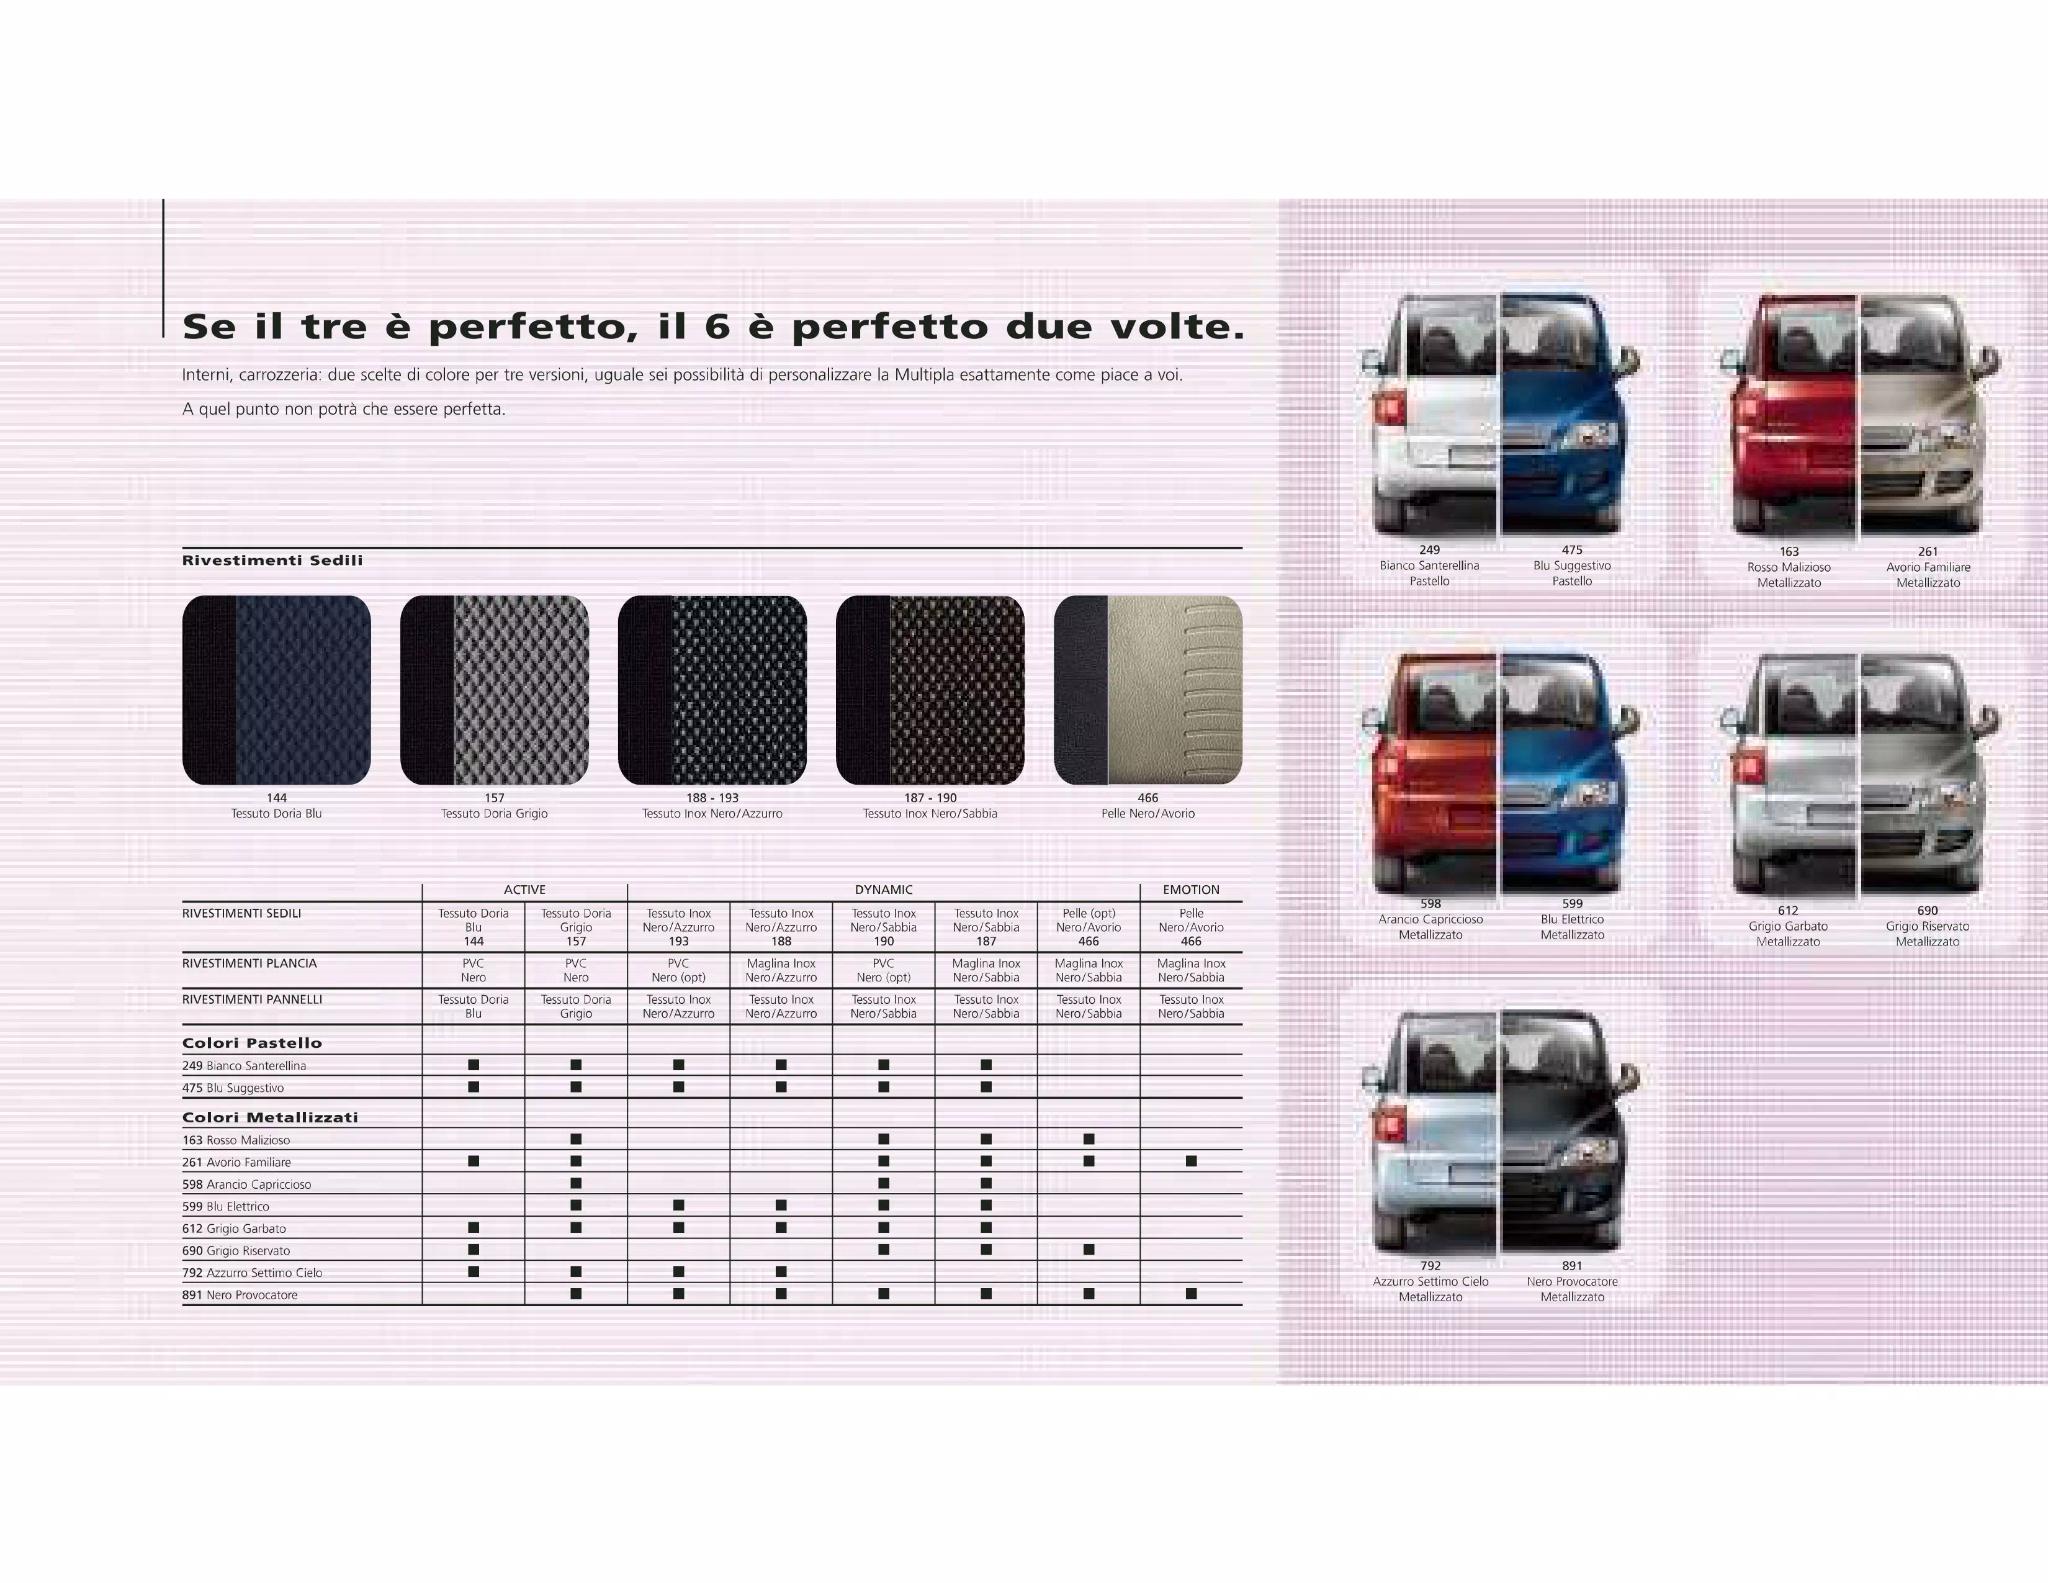 Vehicle Examples and color the 2006 Fiat model Multipla came in.